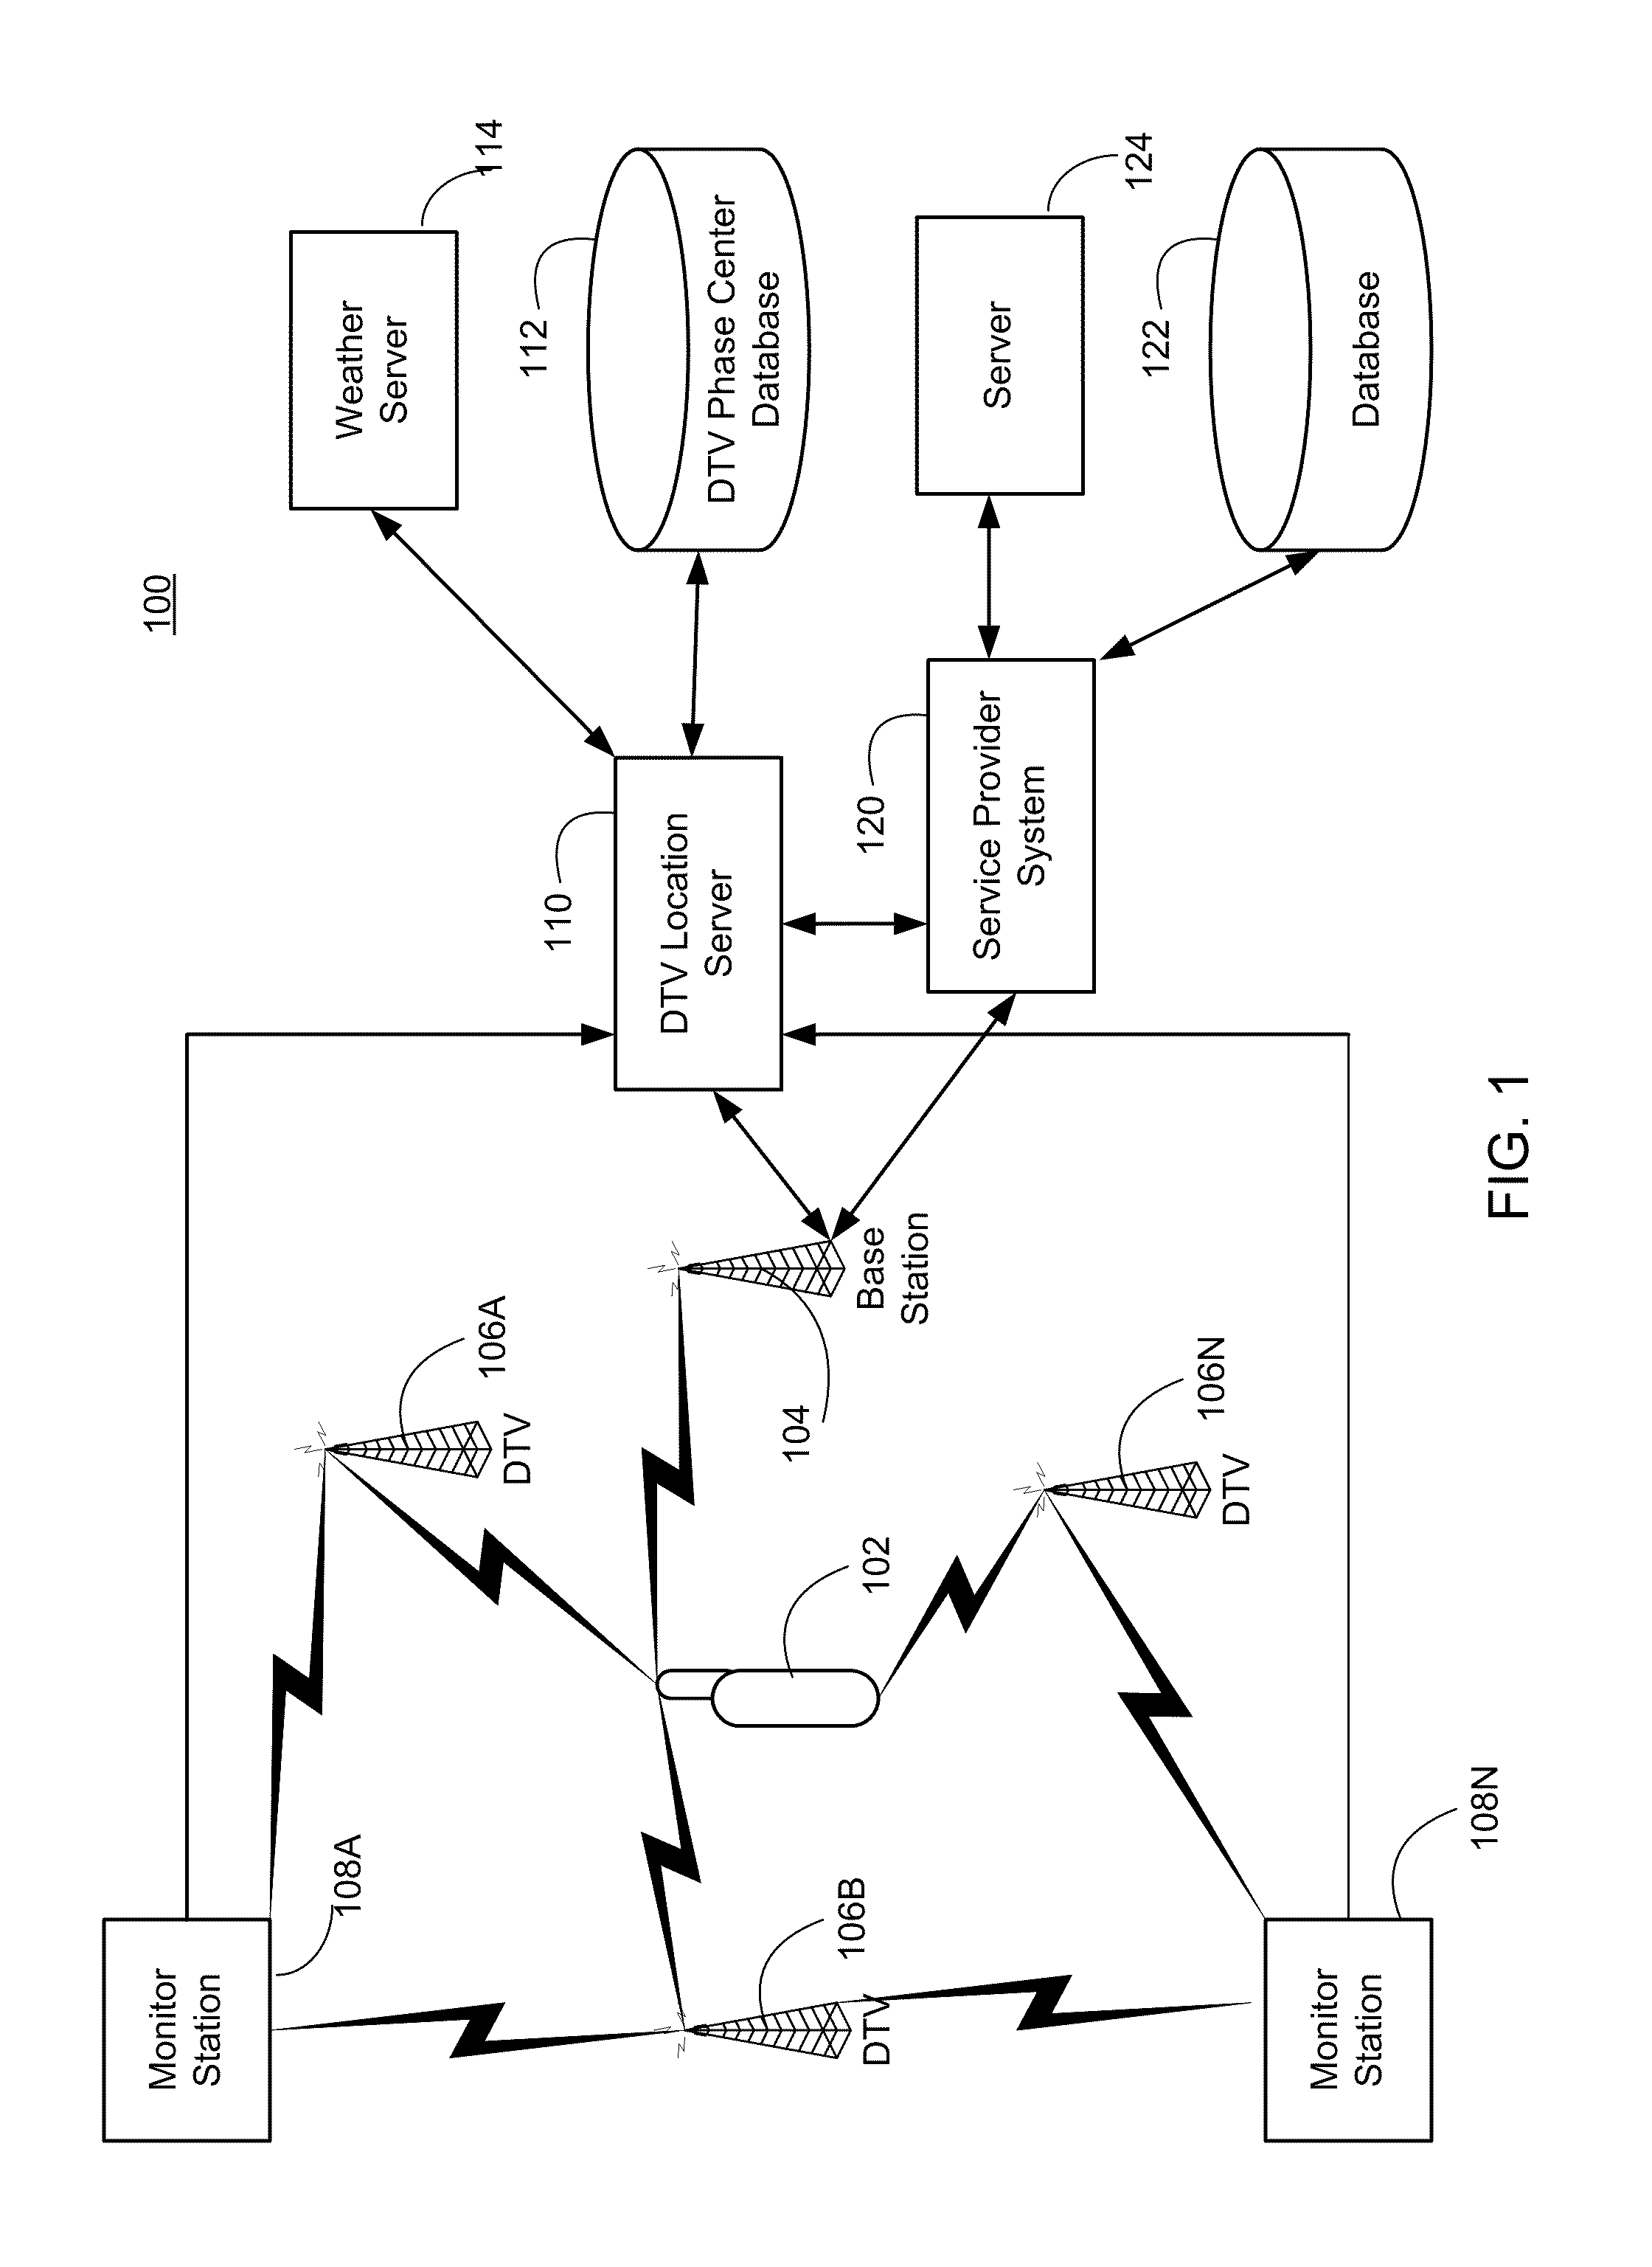 Navigation services based on position location using broadcast digital television signals